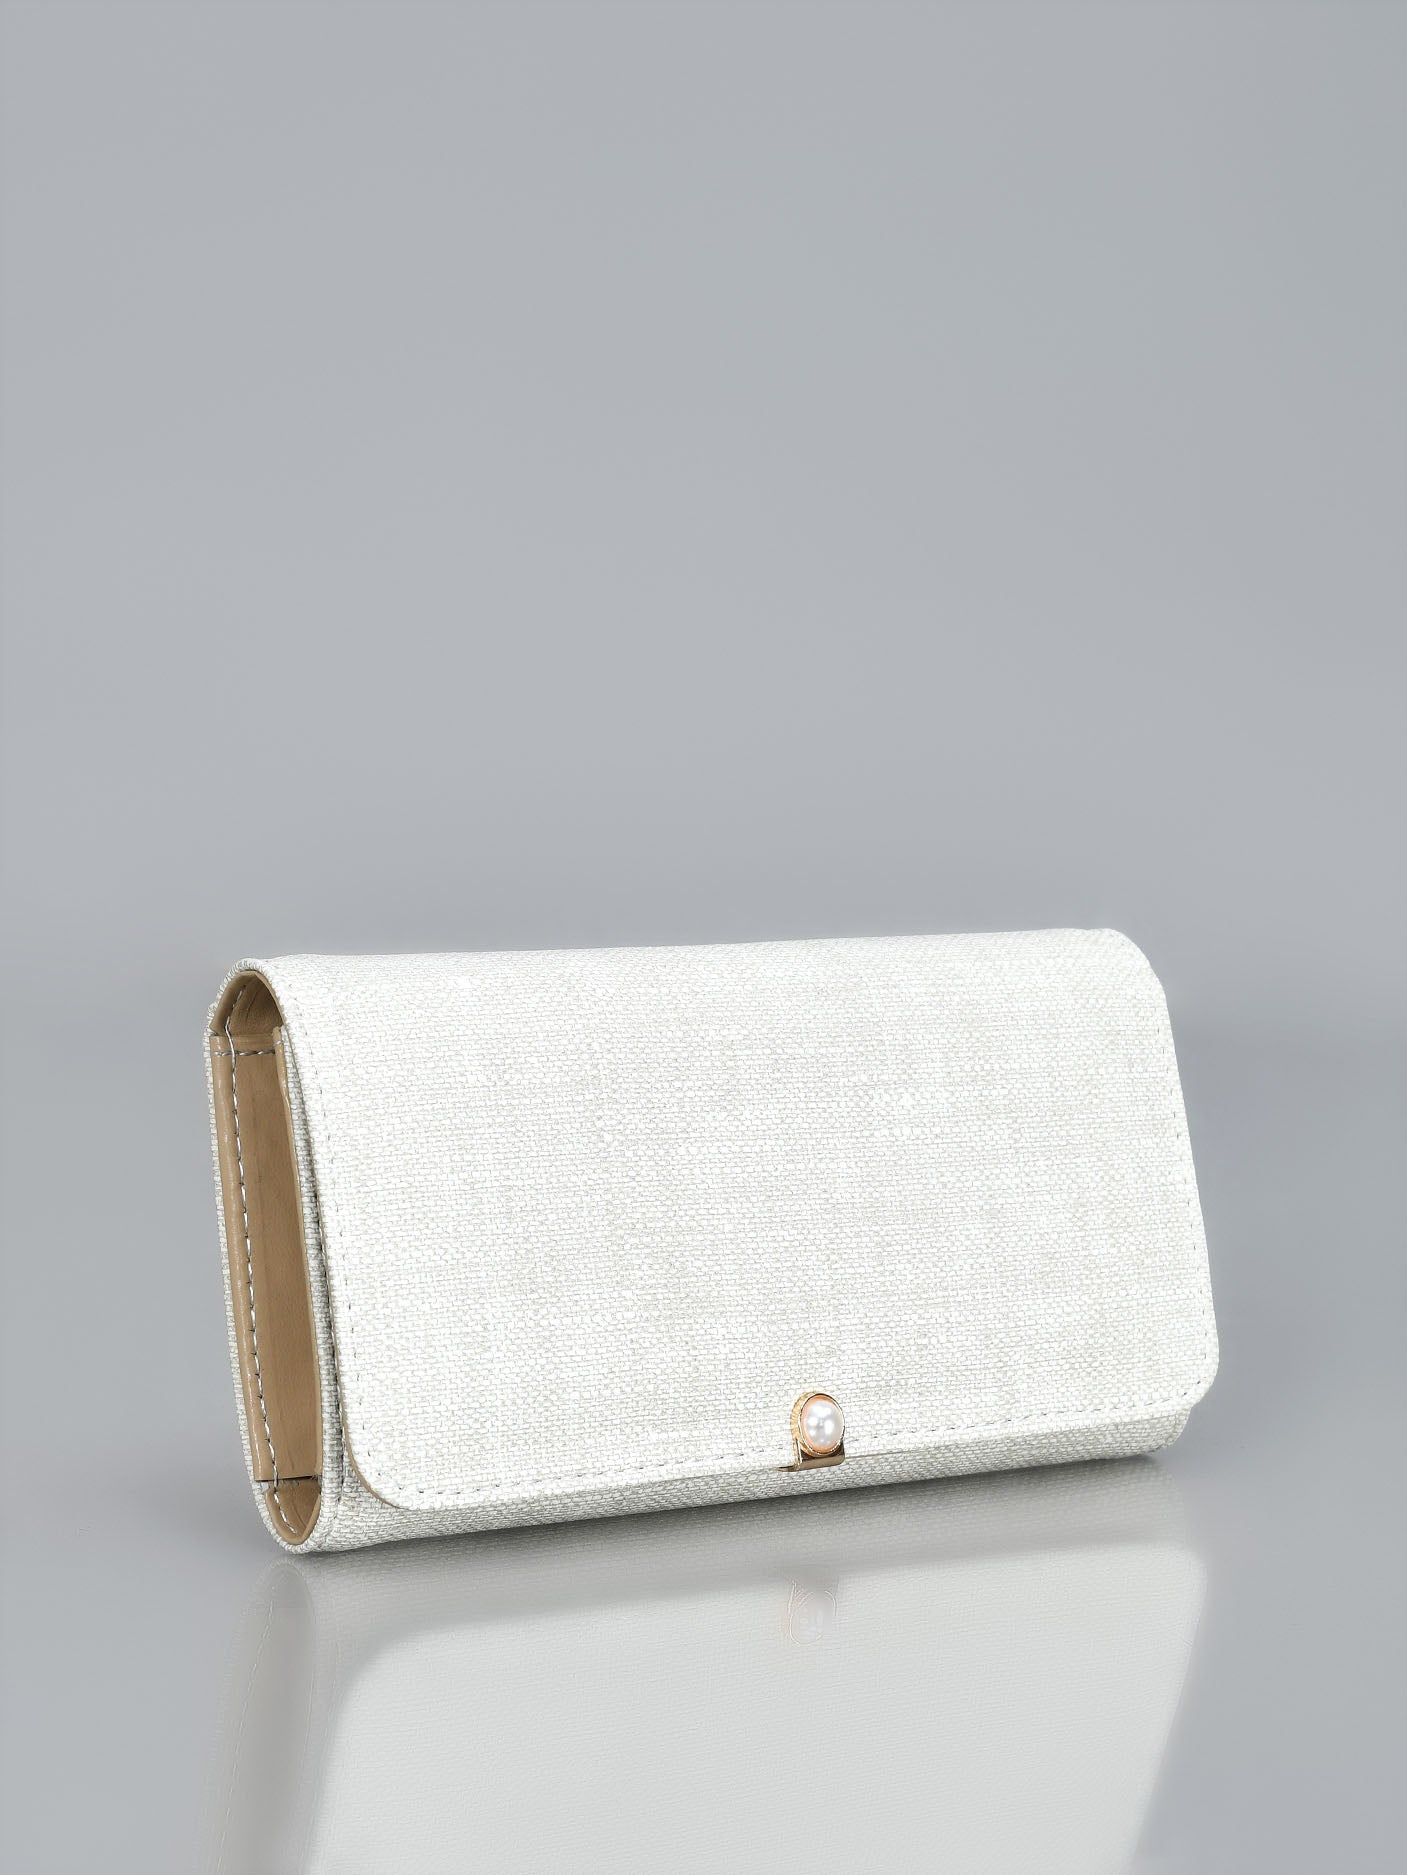 Pearl Finish Wallet